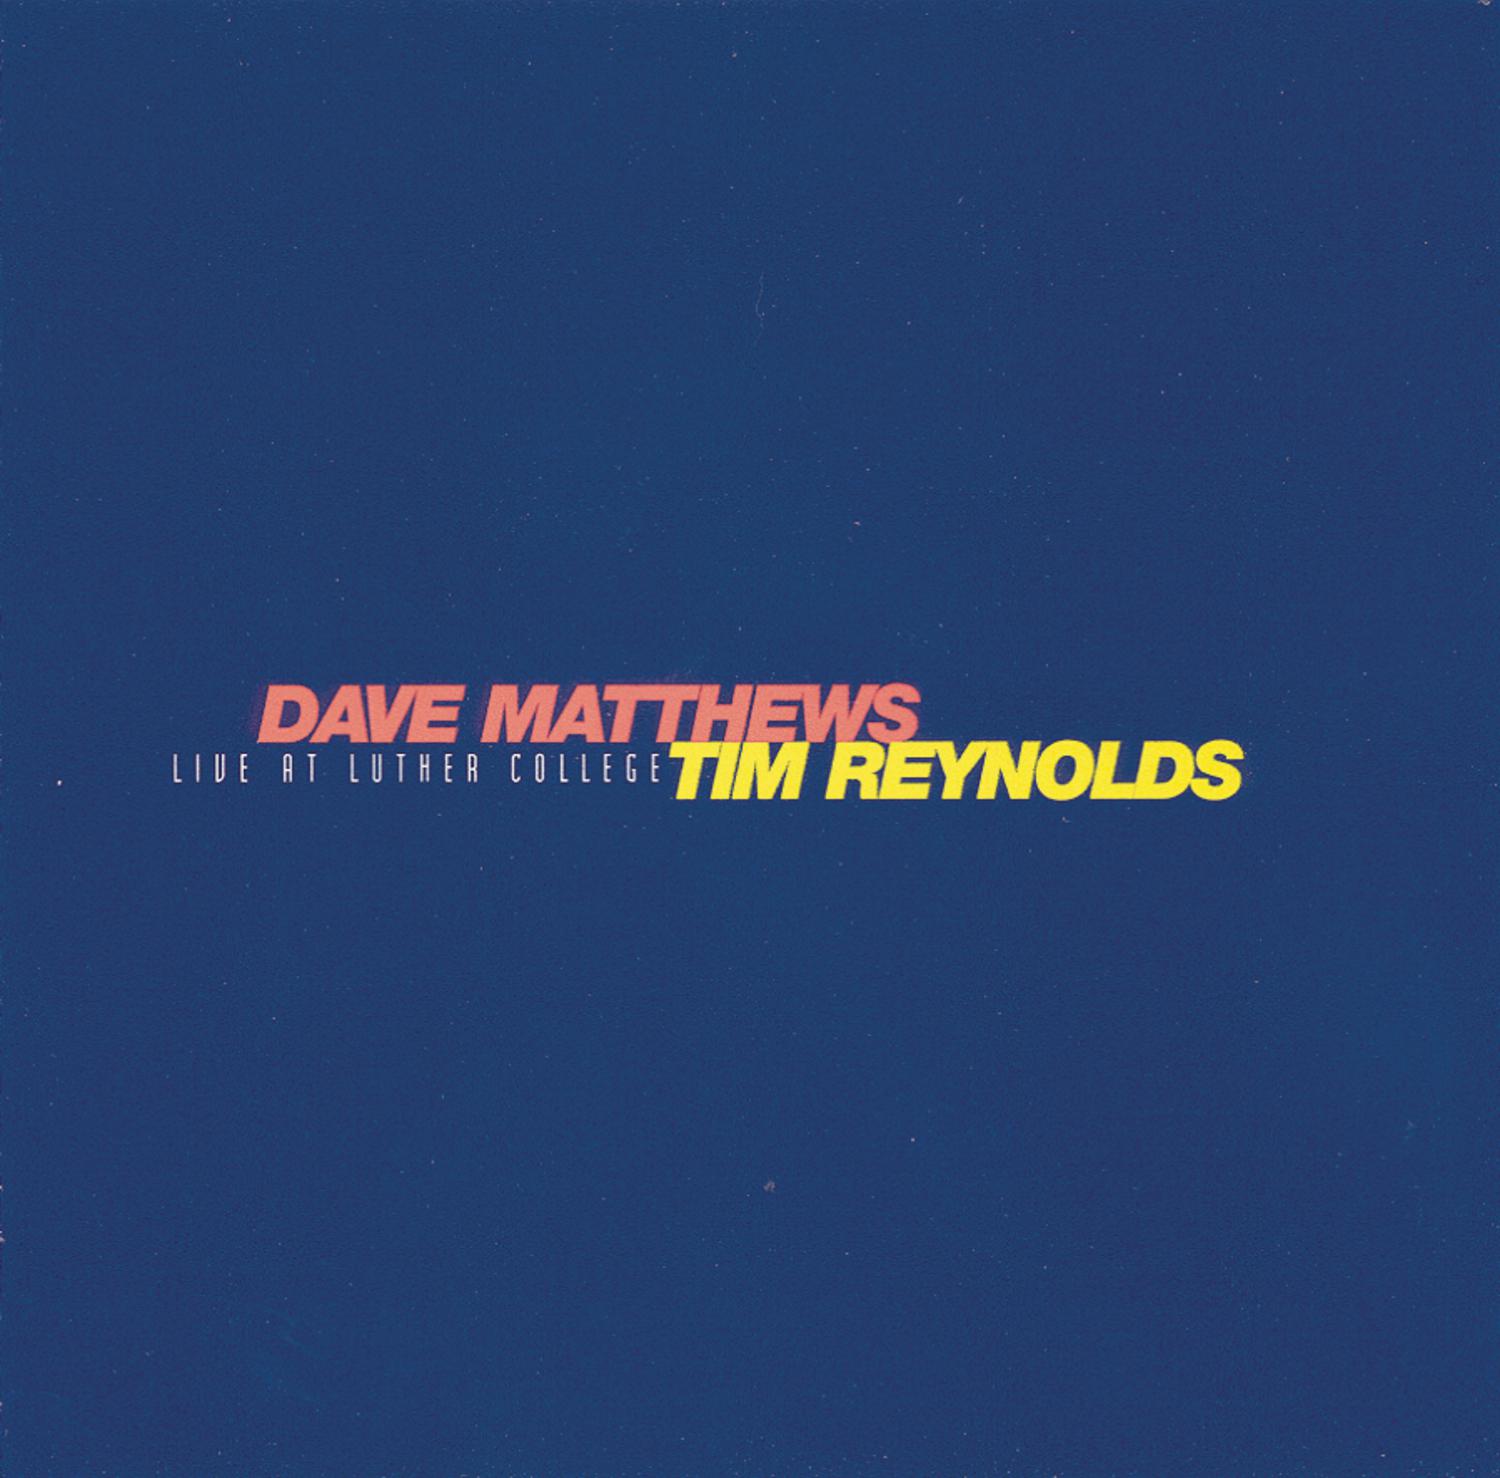 Dave Matthews - Typical Situation (Live at Luther College, Decorah, IA, 02.06.96)